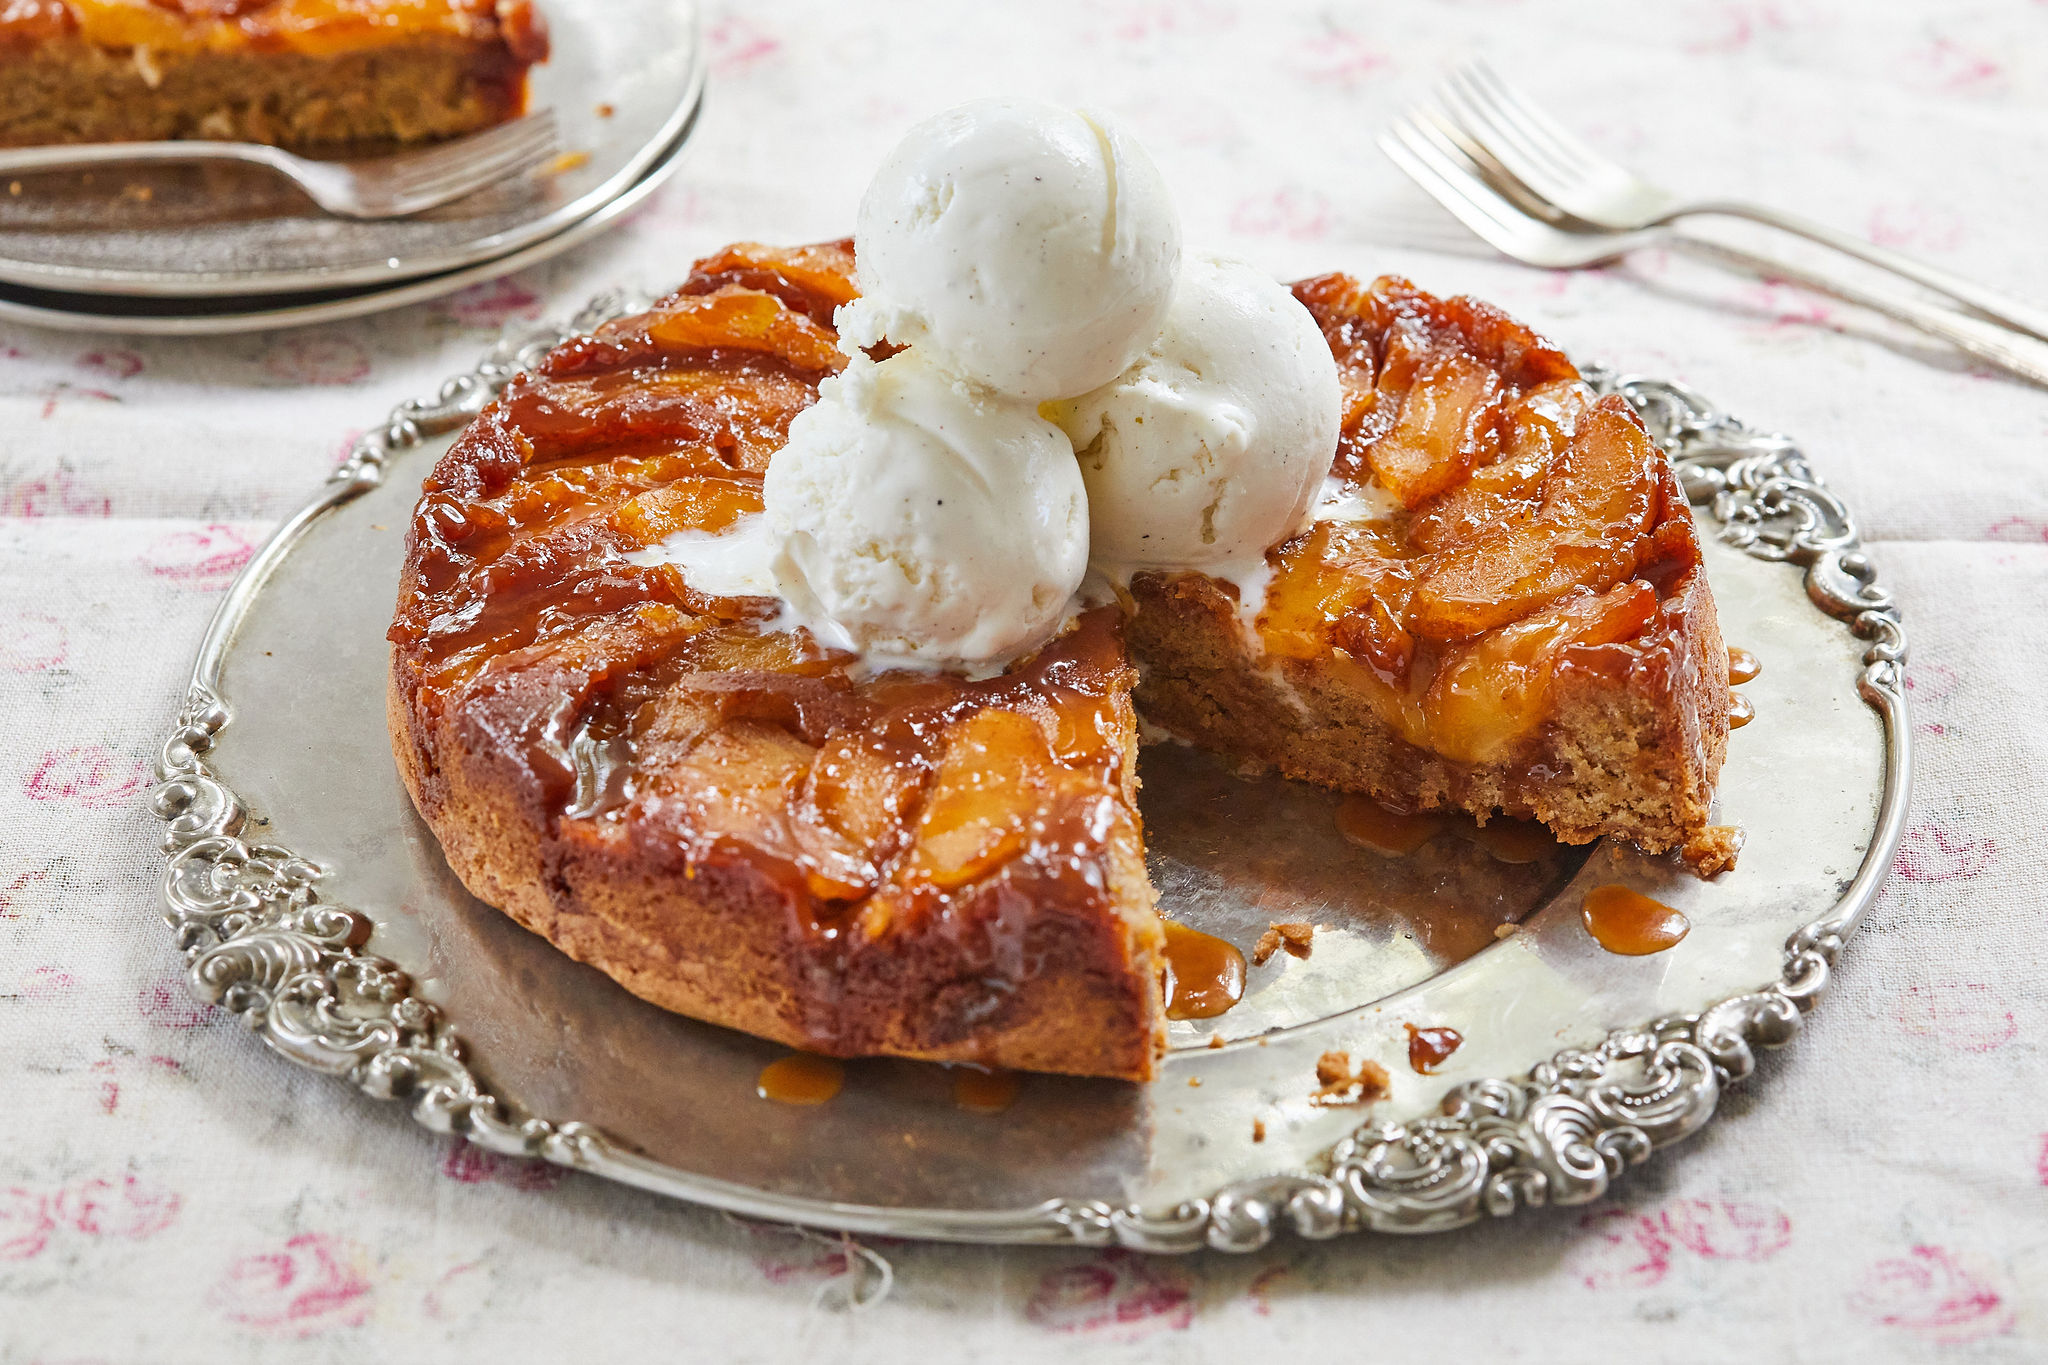 Caramel Apple Upside Down Cake topped with ice cream.